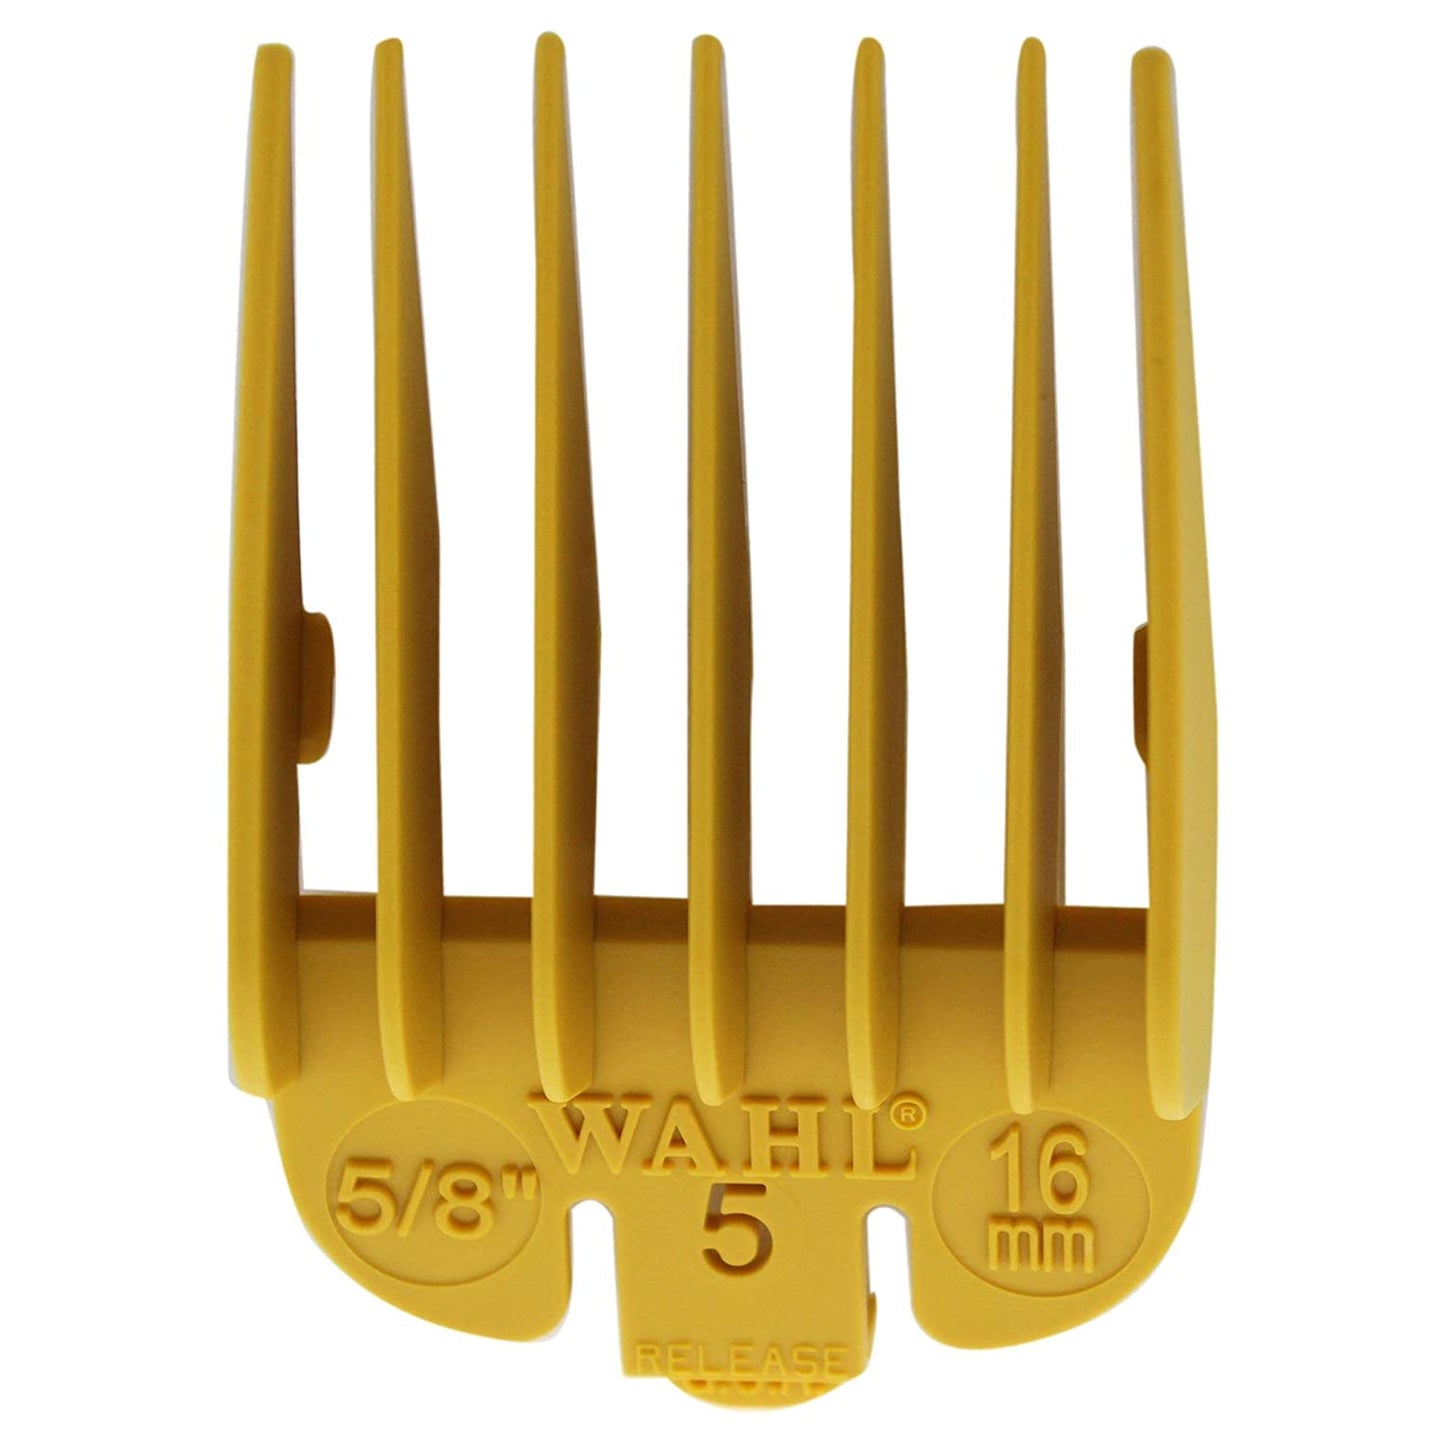 Wahl Professional #5 Color Coded Guide Comb Attachment 5/8" (16 mm)  Yellow